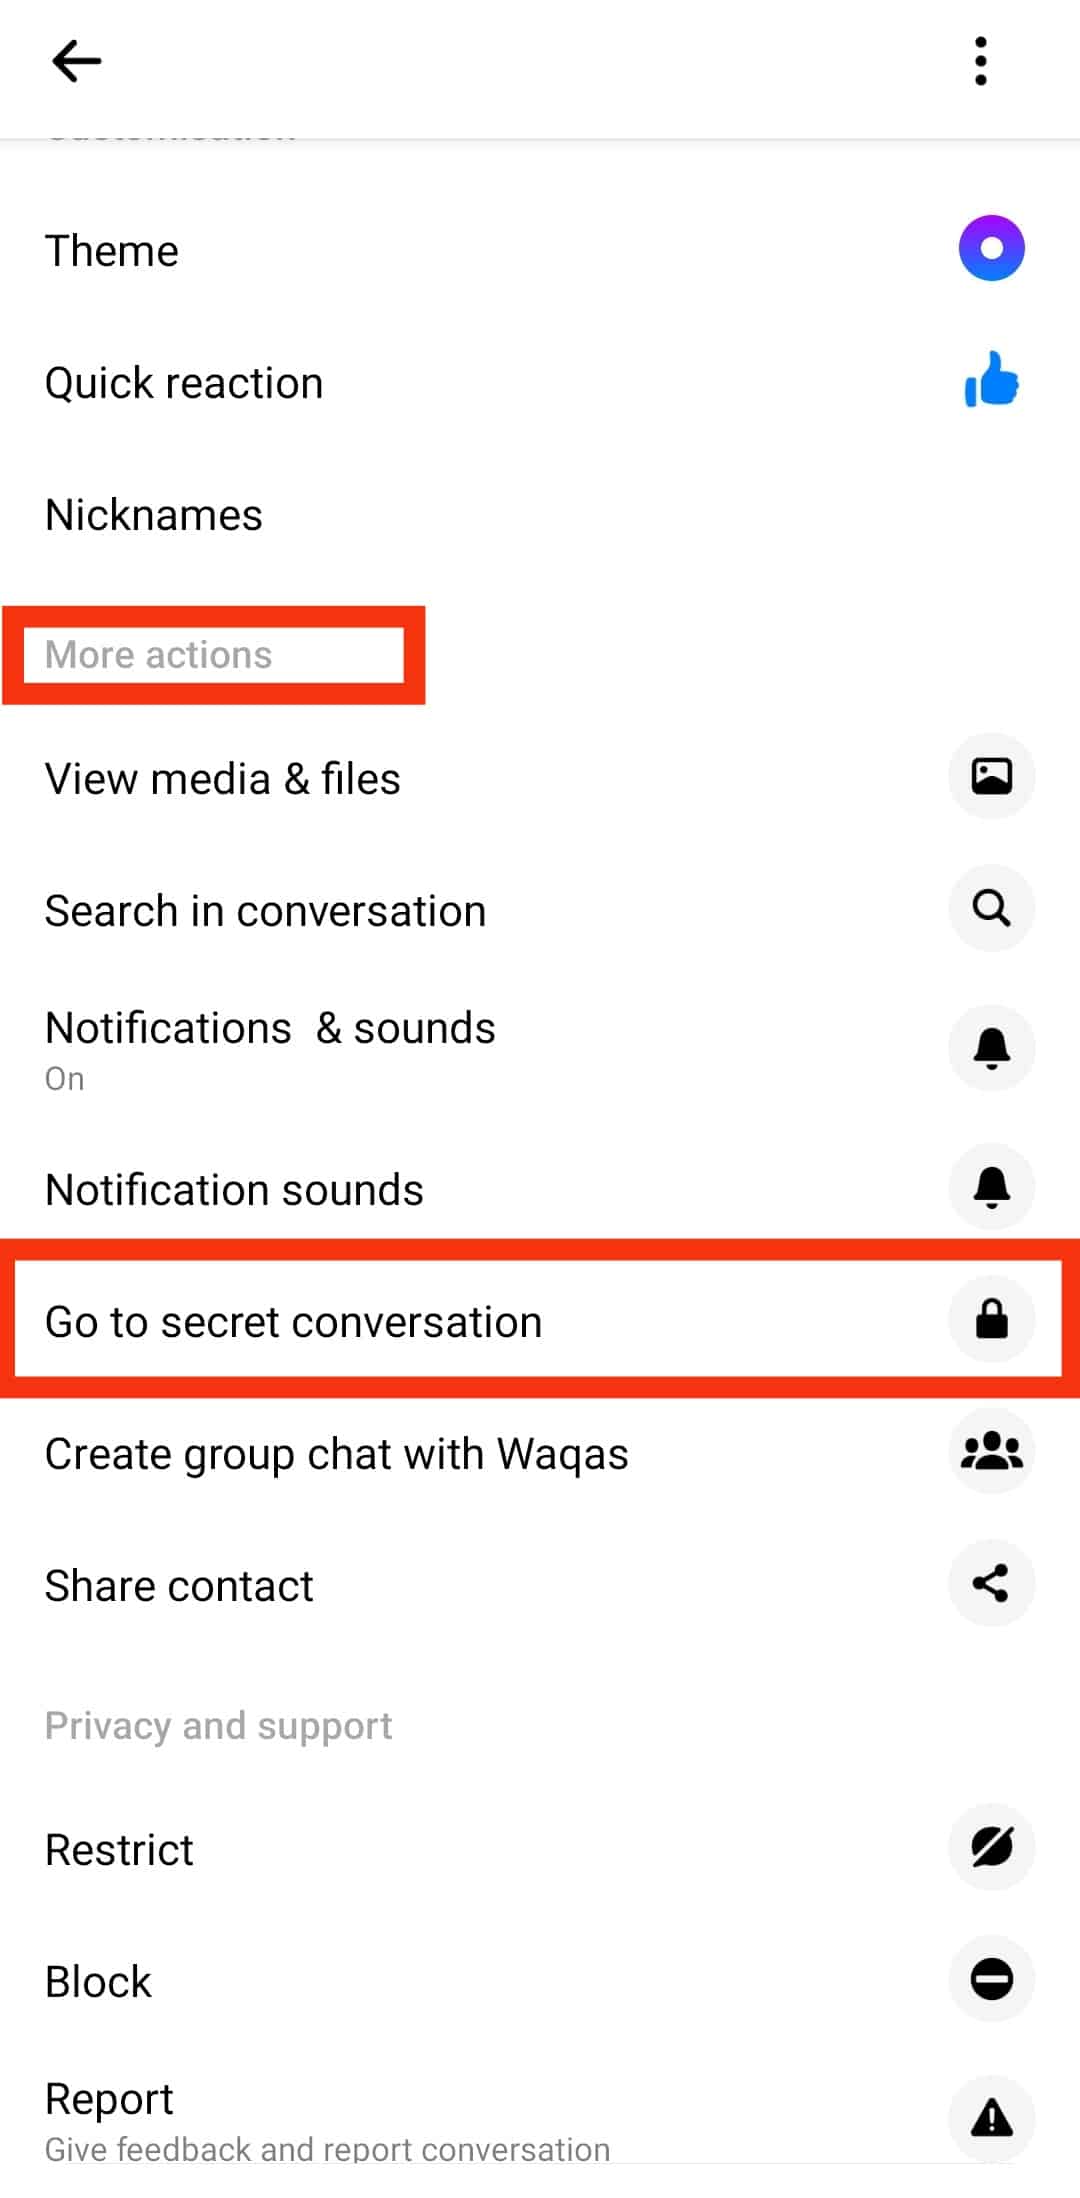 Scroll To More Actions Sections And Click On Go To Secret Conversation